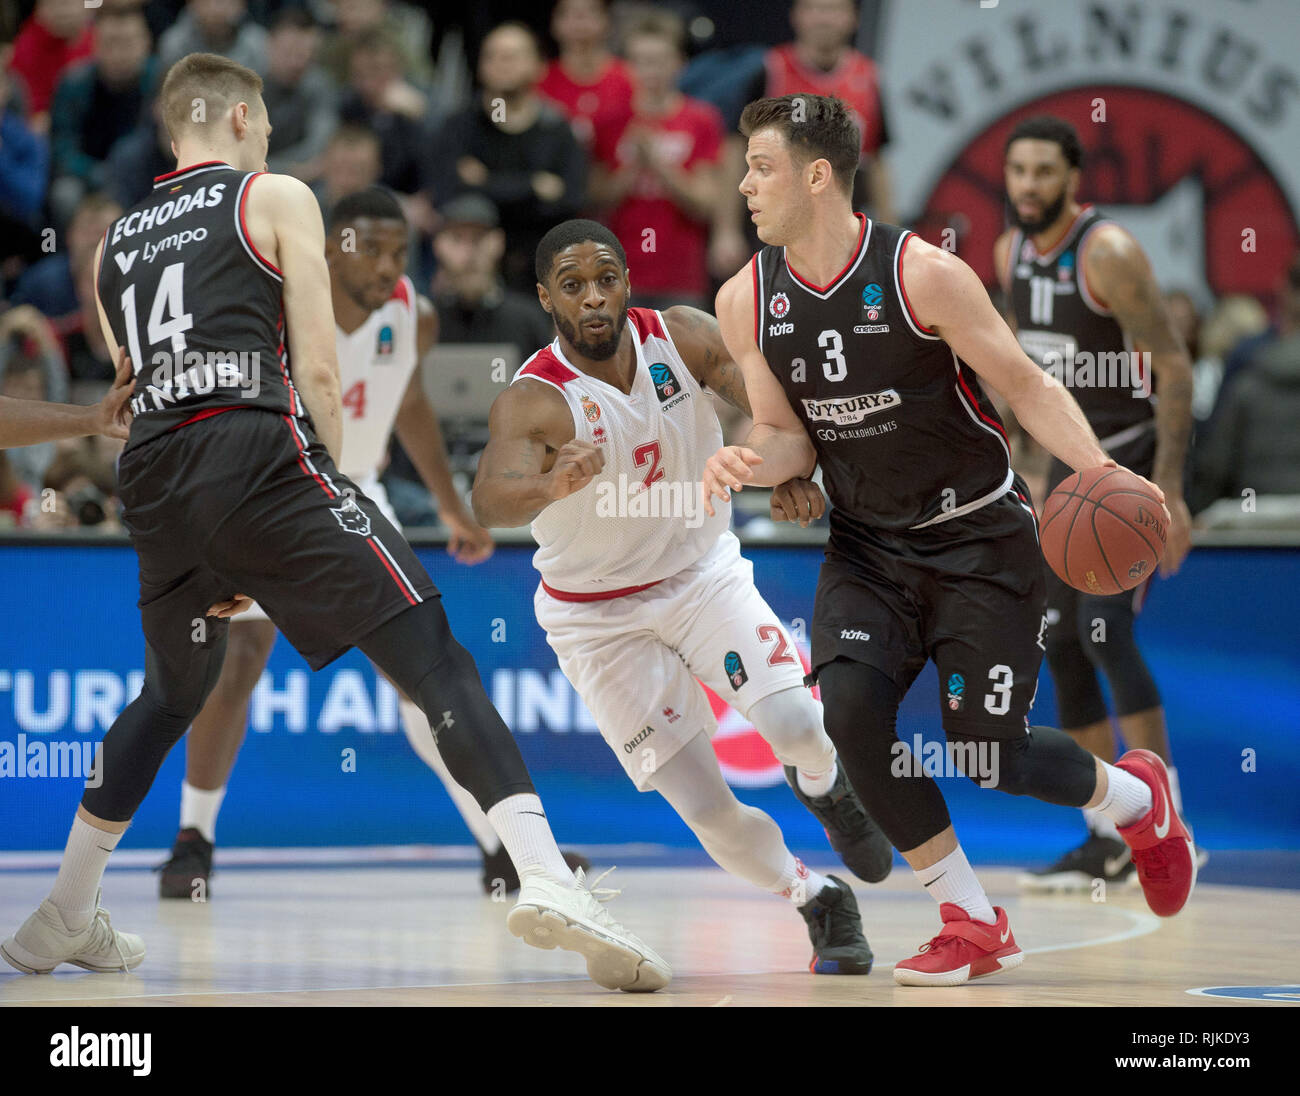 Lithuania, Lithuania. 6th Feb, 2019. Chris Kramer (front R) of Rytas  Vilnius competes during a Top 16 Round 6 match between Rytas Vilnius and AS  Monaco at 2018-2019 Eurocup basketball tournament in